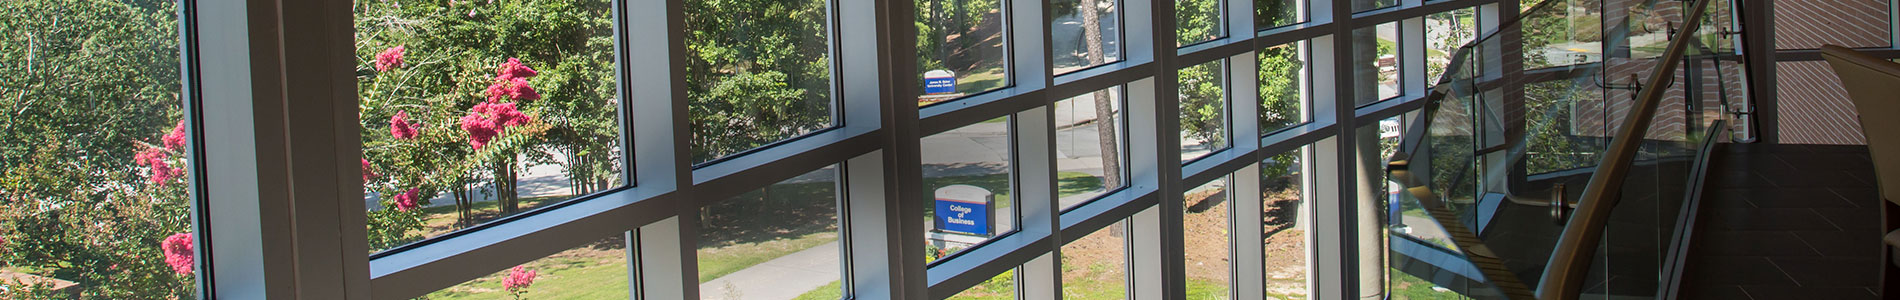 College of Business Advising banner image